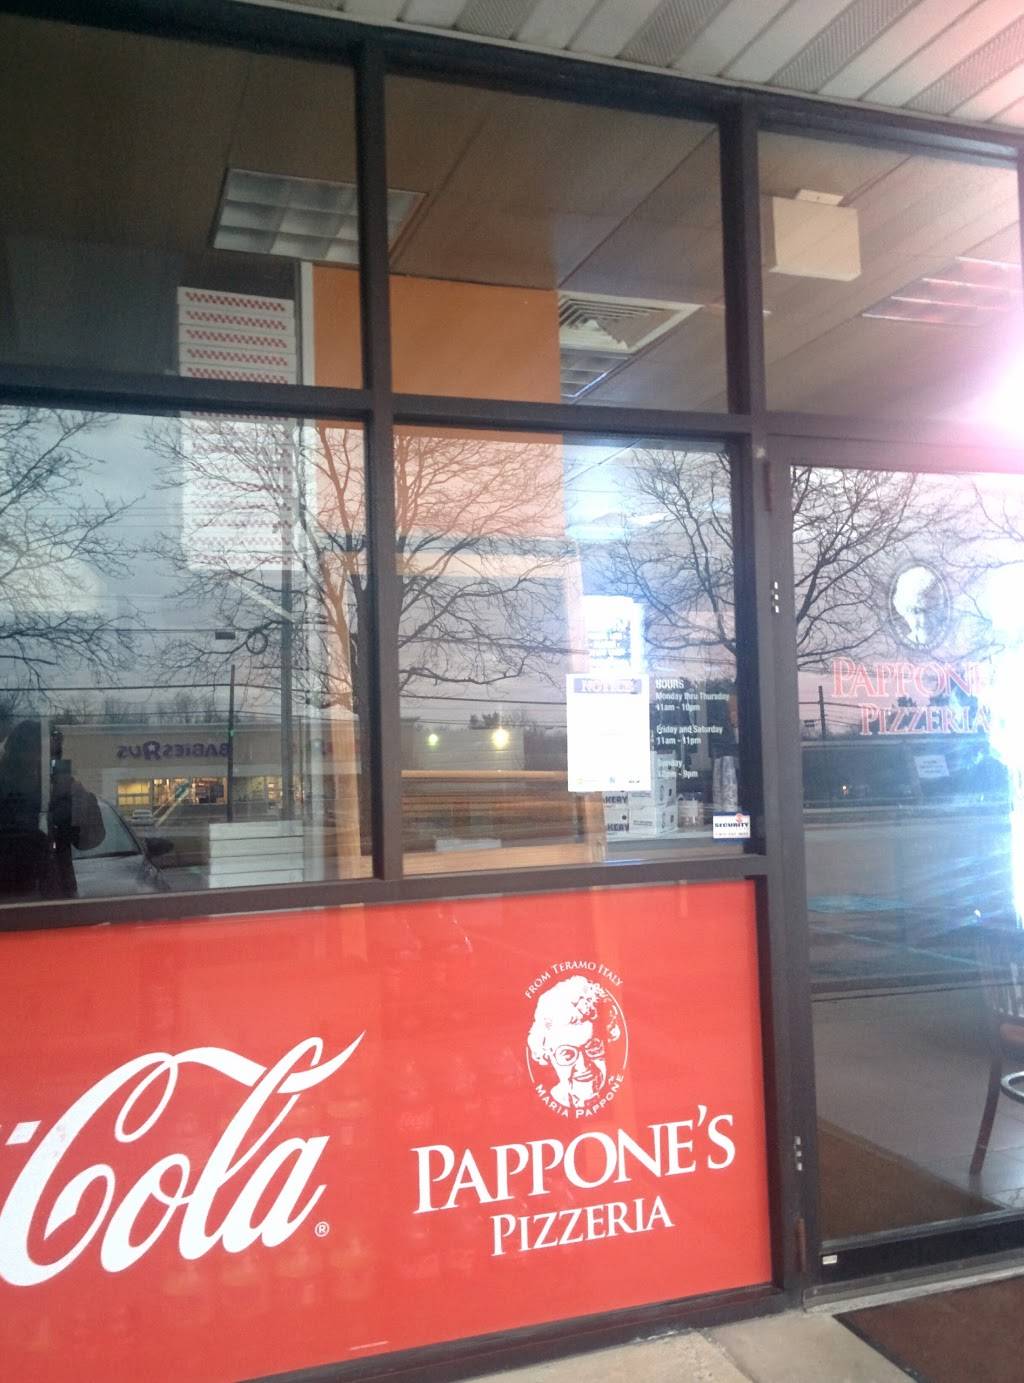 Pappones Pizzeria | meal takeaway | 1145 W Baltimore Pike, Media, PA 19063, USA | 4844428782 OR +1 484-442-8782